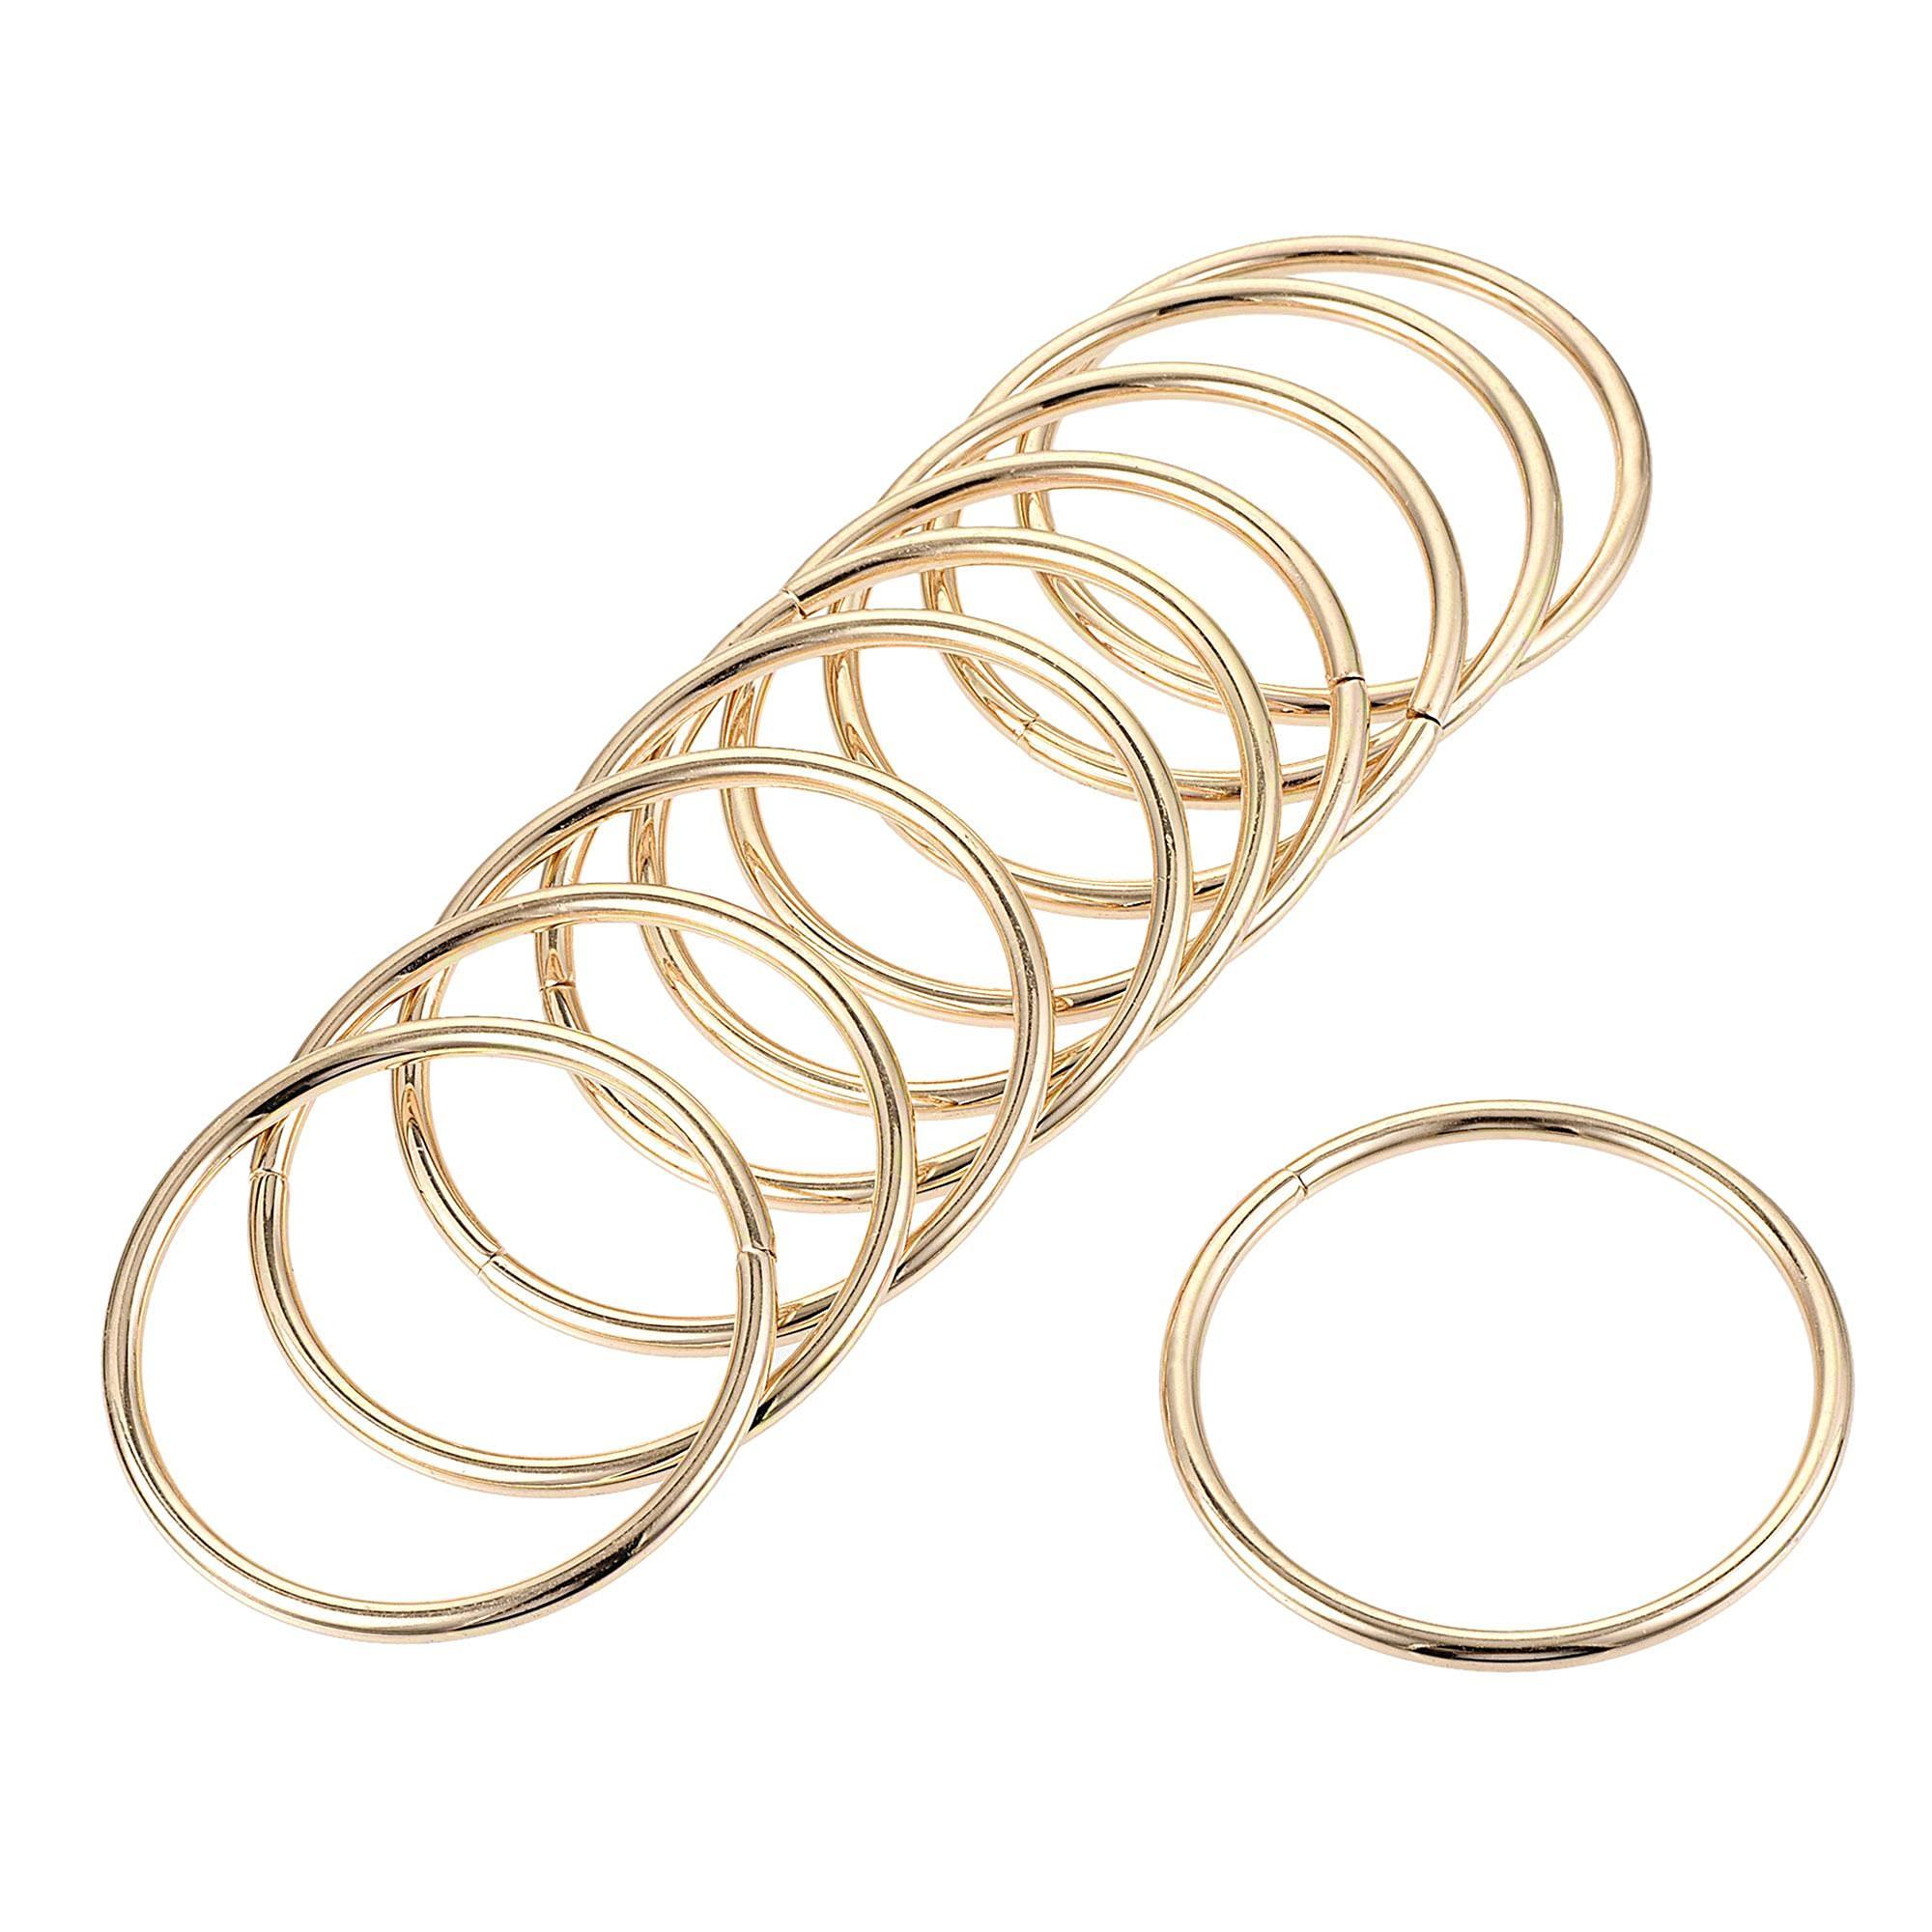 sourcing map 2"(50mm) Metal O Rings 3.5mm Thick Non-Welded Ring for Straps Bags Decoration Hardware DIY Gold Tone 20pcs